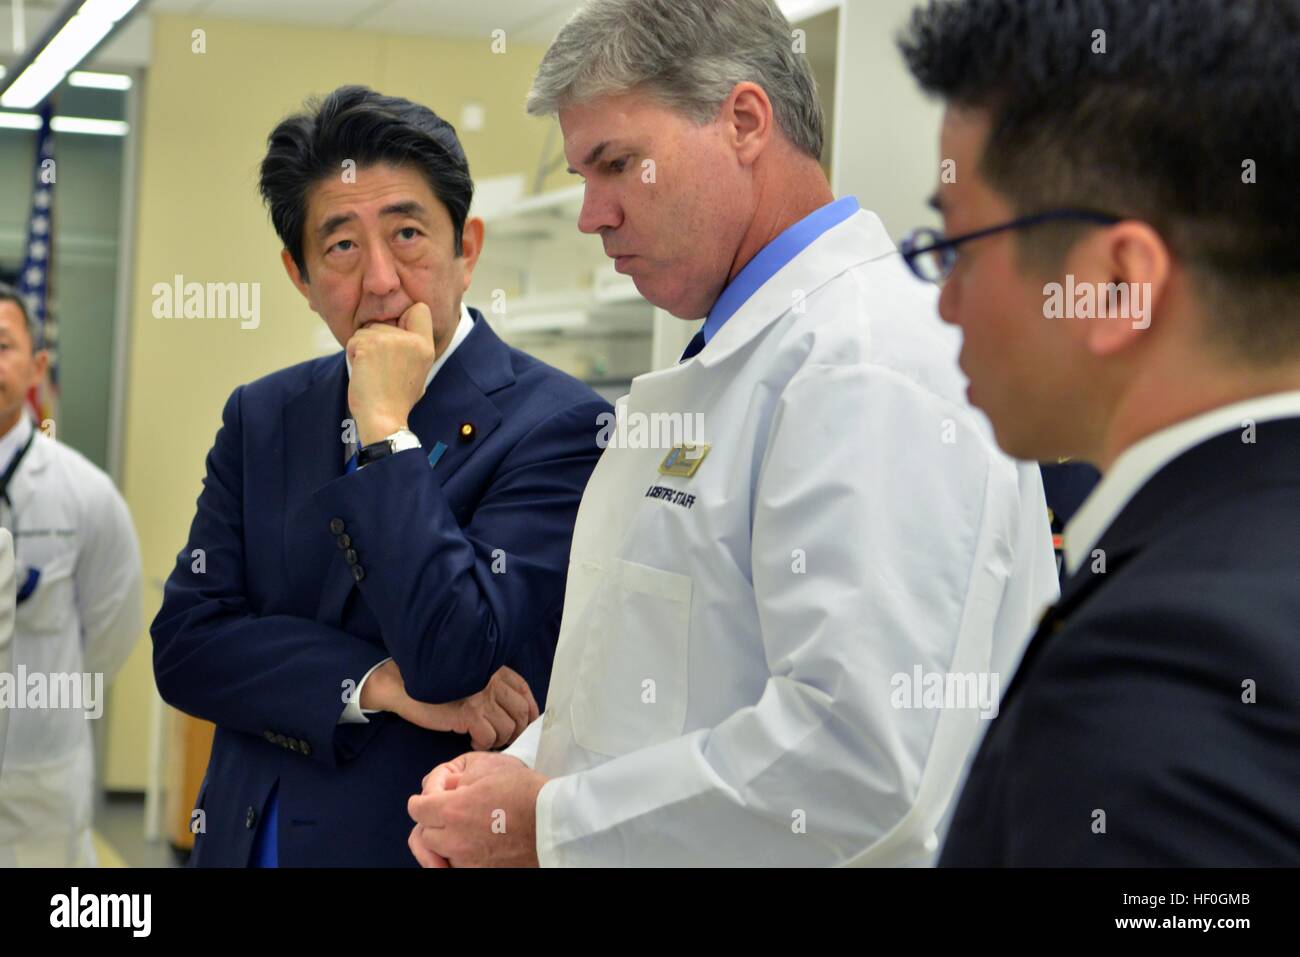 Japanese Prime Minister Shinzo Abe, left, is briefed by Dr. John Byrd during a tour of the laboratory at the Defense POW/MIA Accounting Agency facility December 26, 2016 in Pearl Harbor, Hawaii. Abe is the first Japanese leader to publicly view the site of the Pearl Harbor Attack. Stock Photo